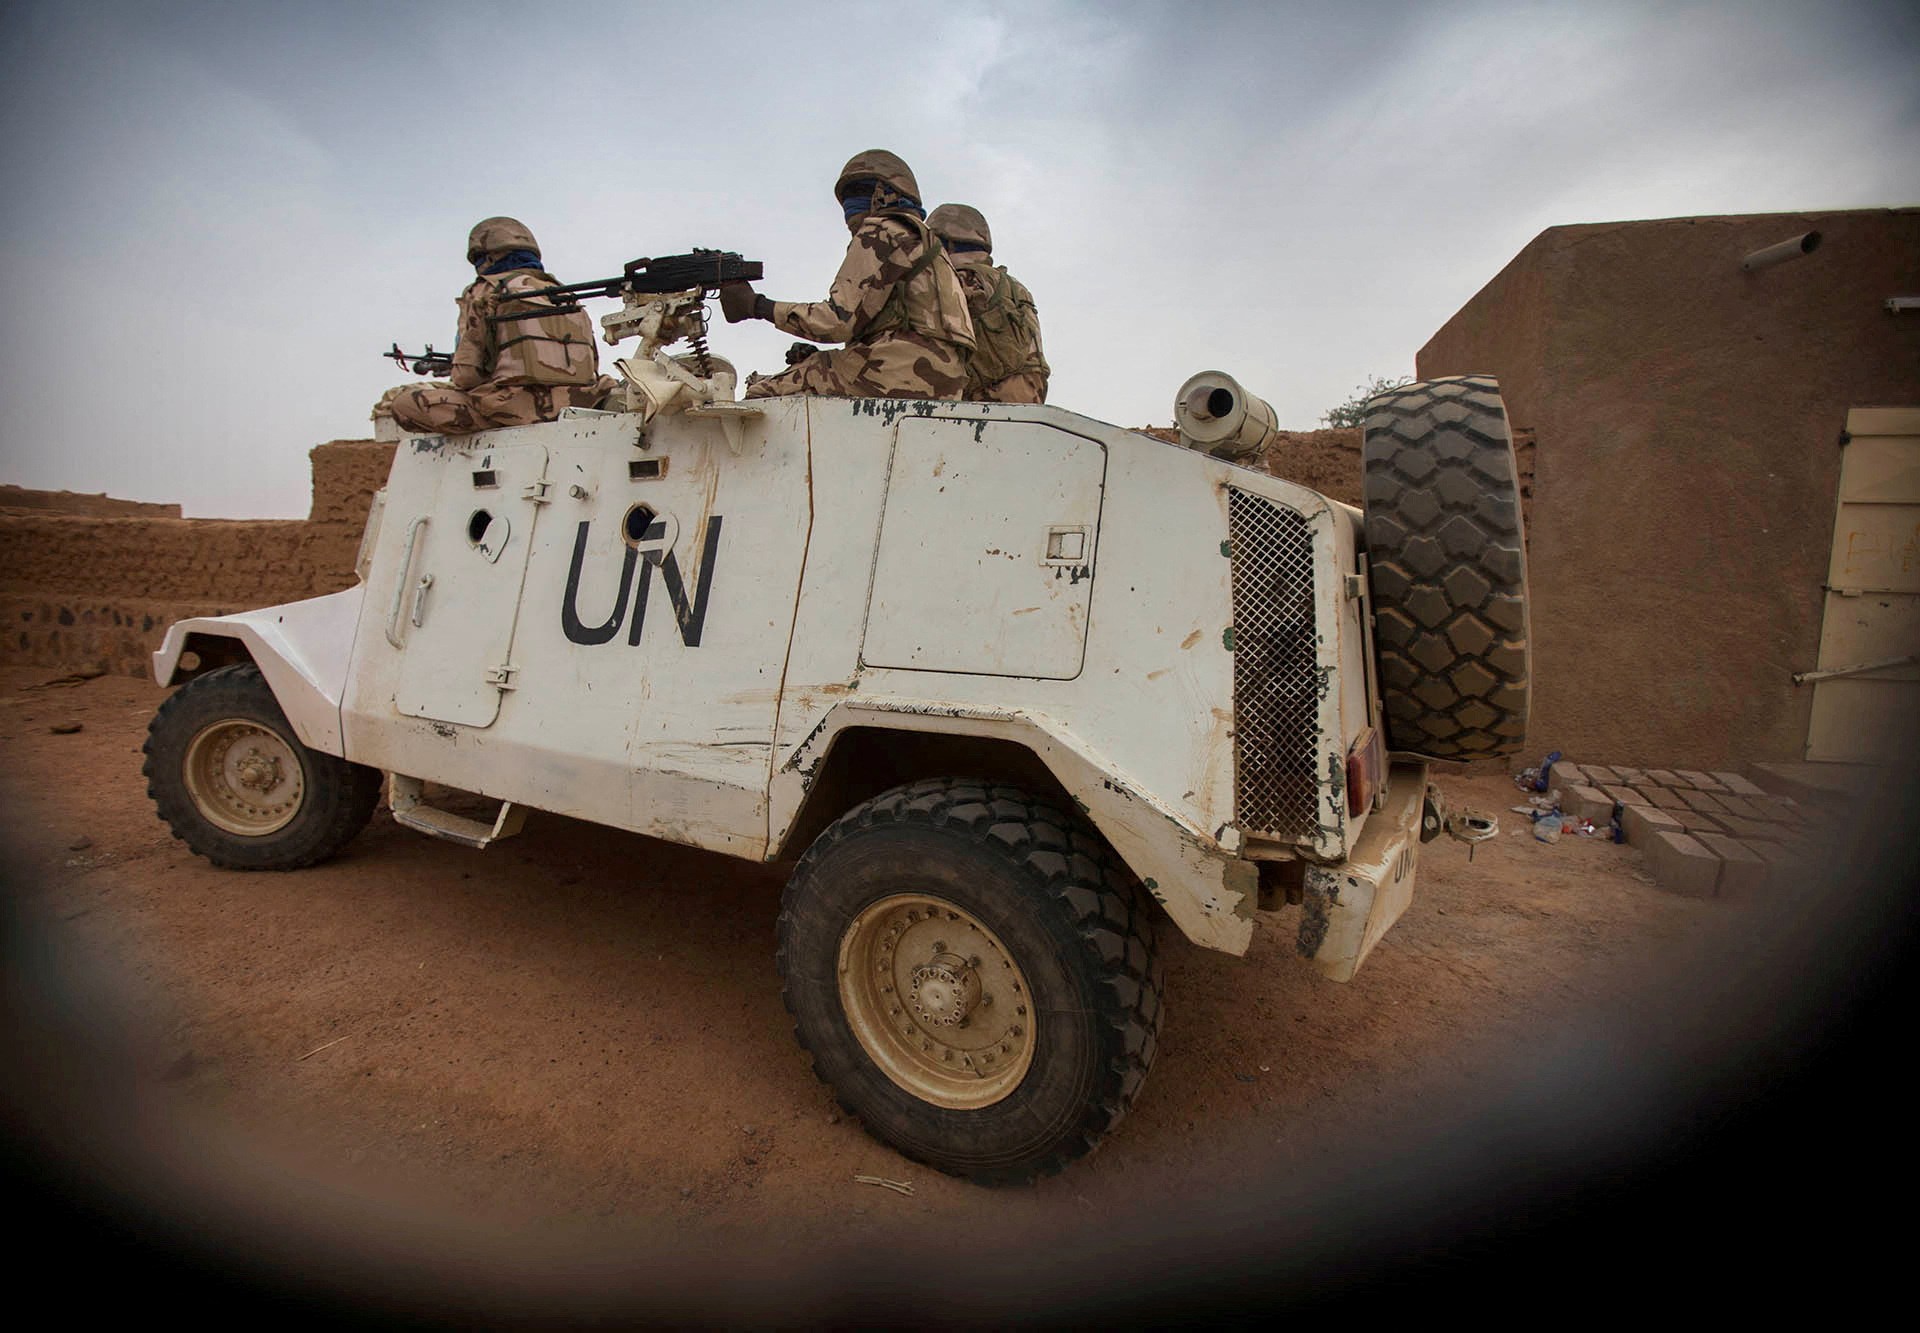 UN peacekeeping mission in Mali officially ends after 10 years | Conflict News #peacekeeping #mission #Mali #officially #ends #years #Conflict #News